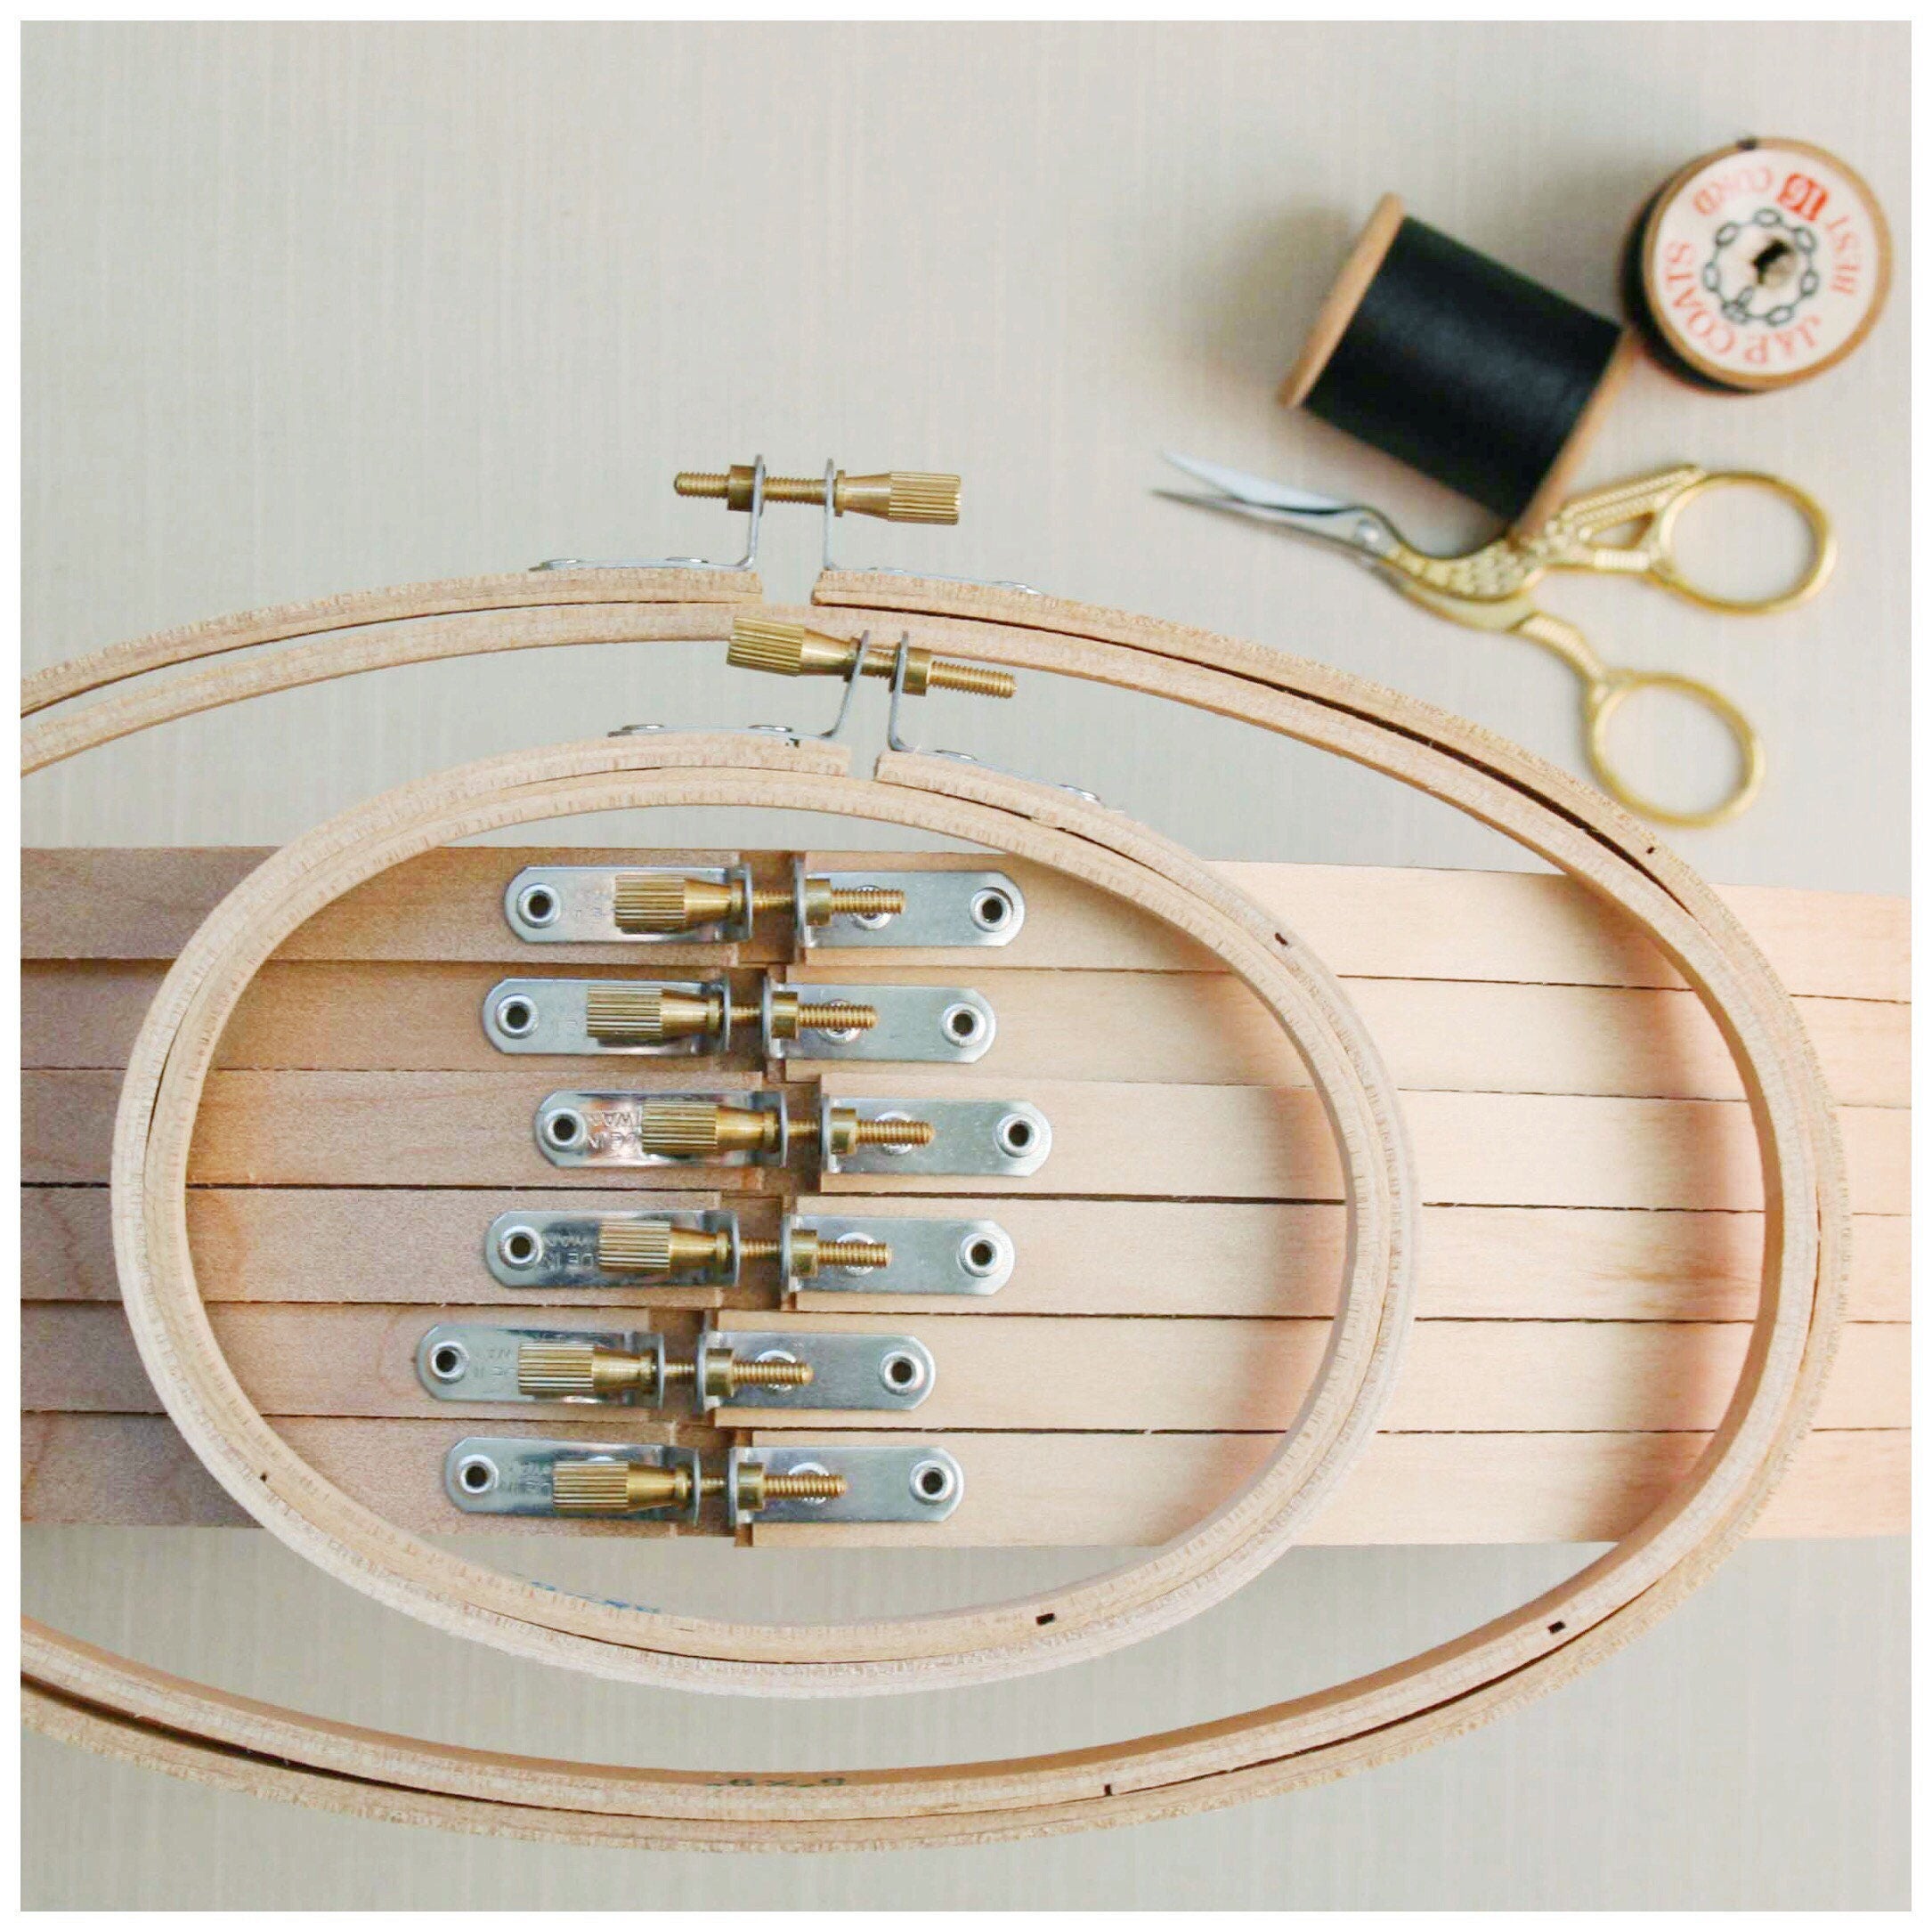 Embroidery Kits 12 Inch Hoop 